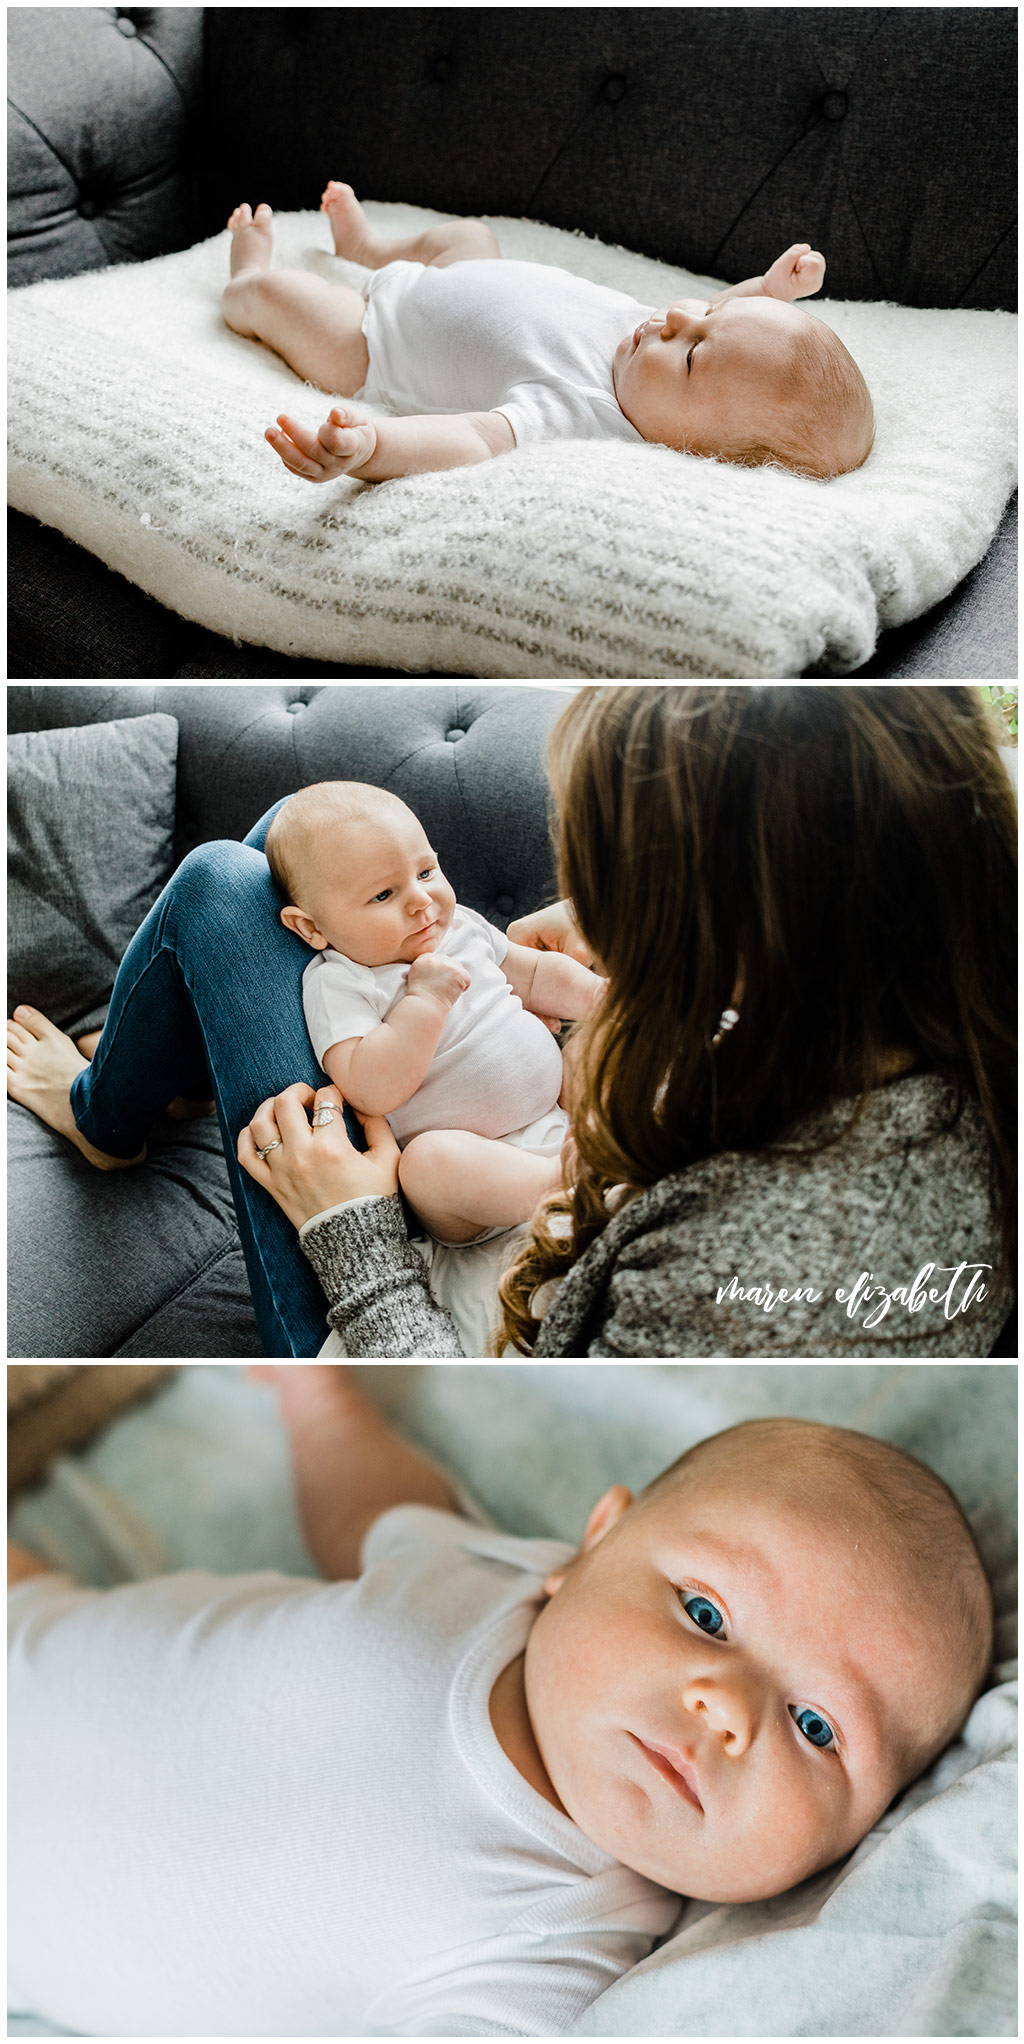 Ogden newborn pictures in a 1897 fixer upper document a special chapter in this family's life. Utah Newborn Photographer.